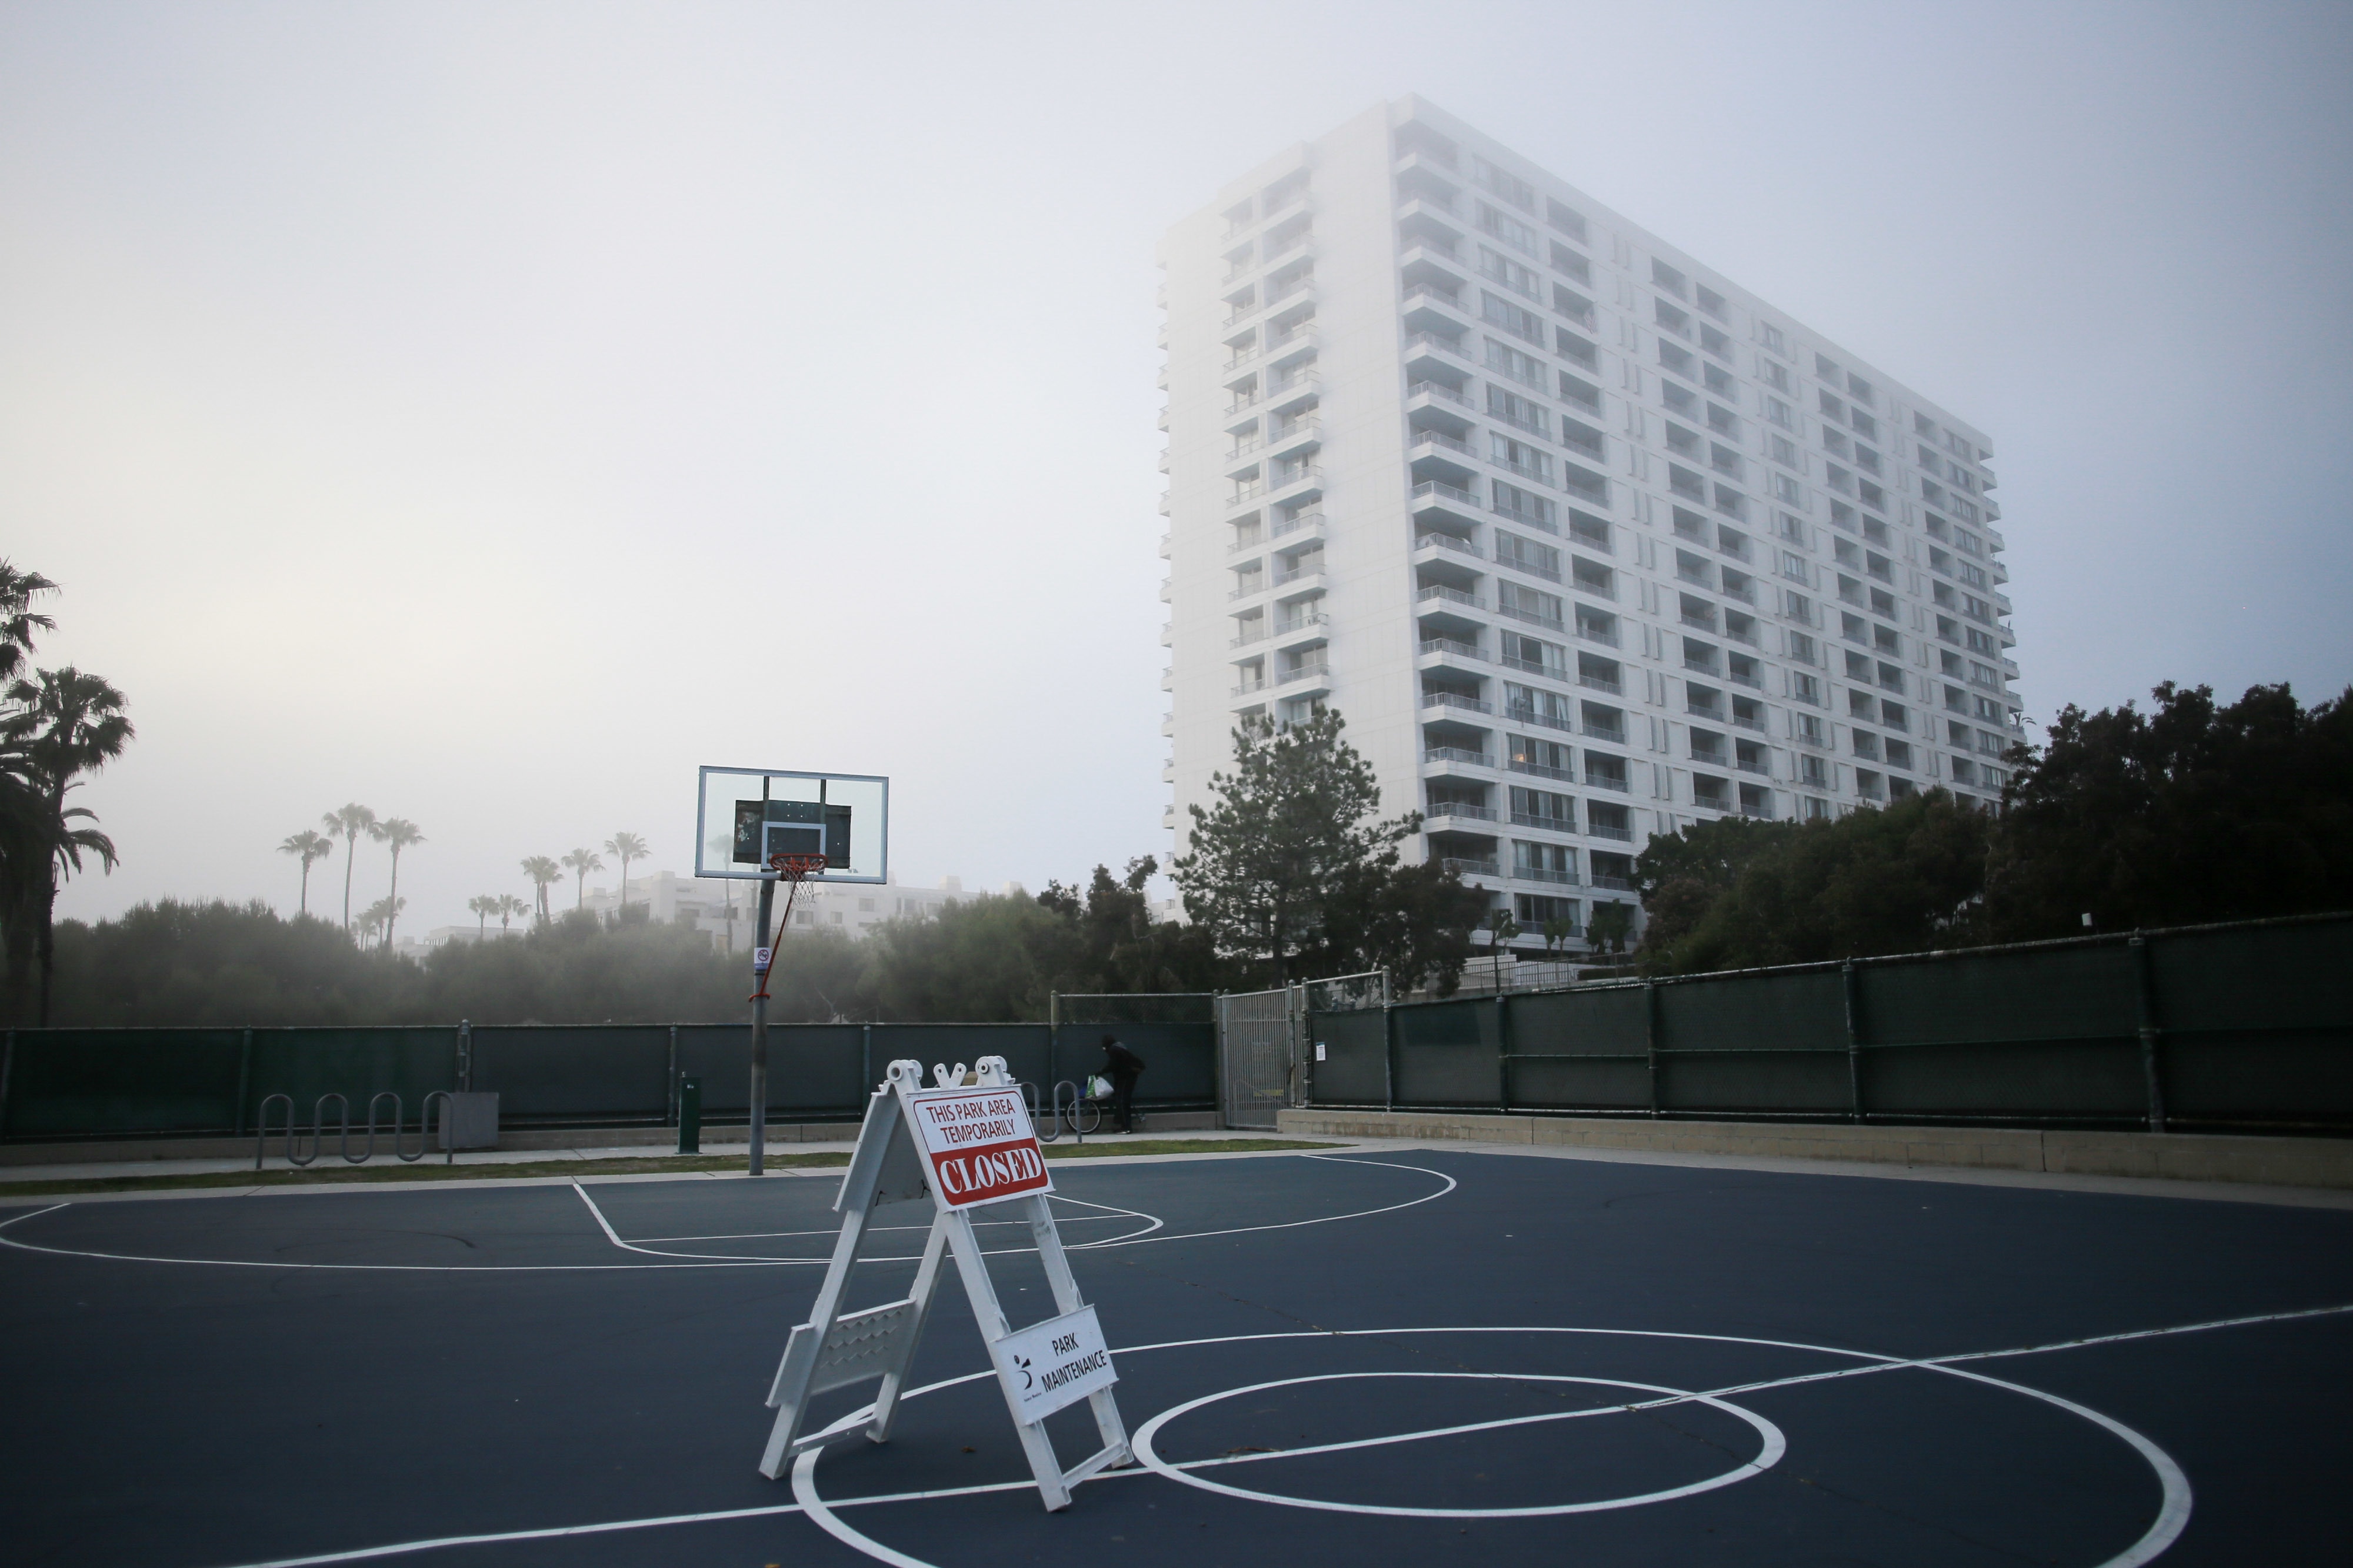 A deserted basketball court due to lockdown measures.